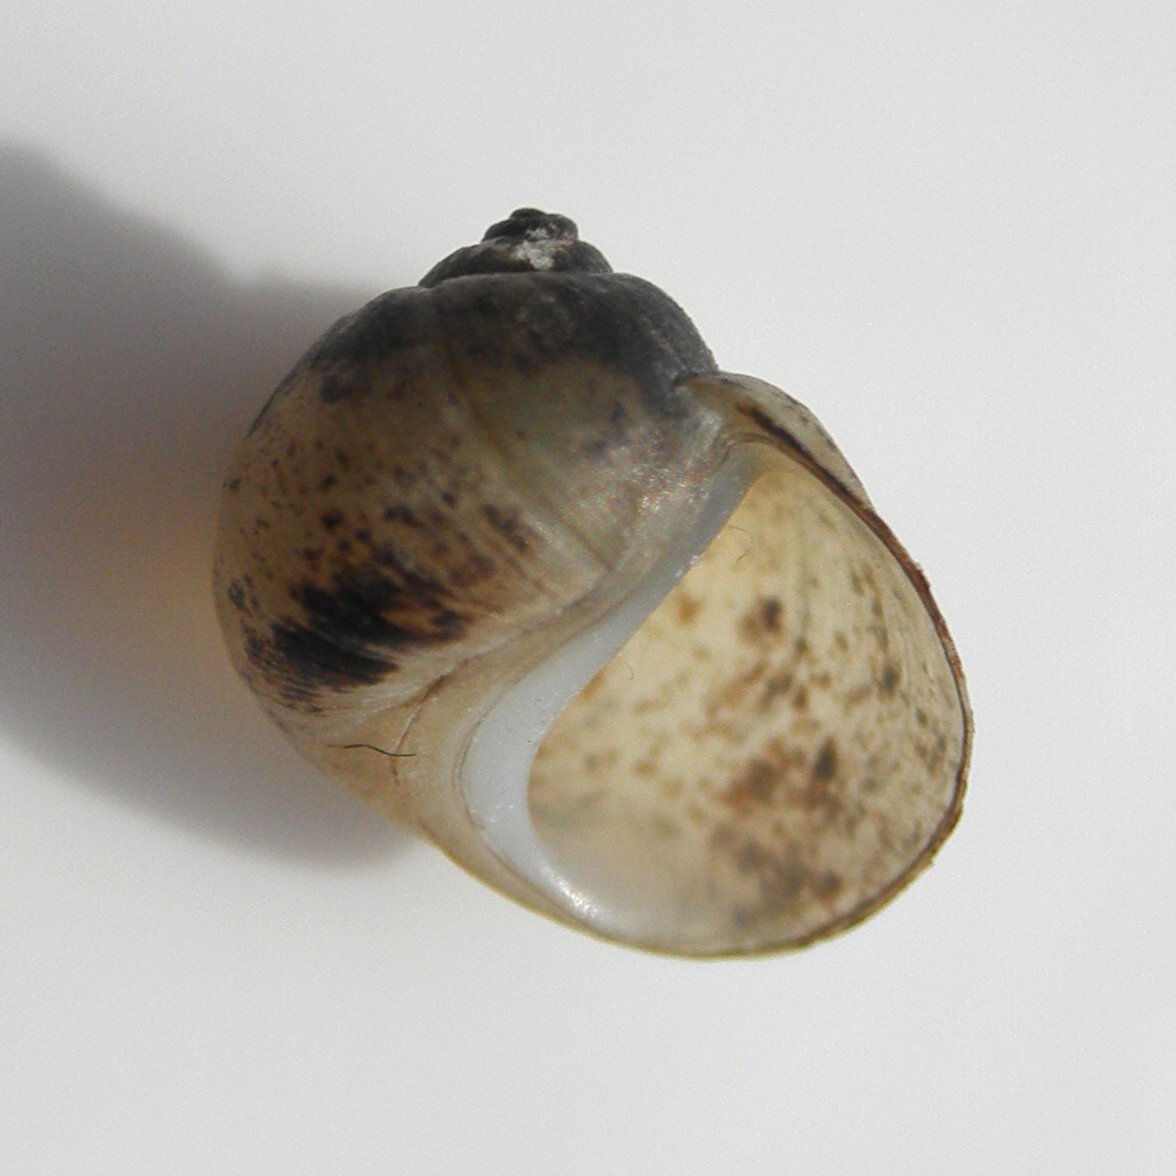 apertural view of the shell of Lithoglyphus naticoides